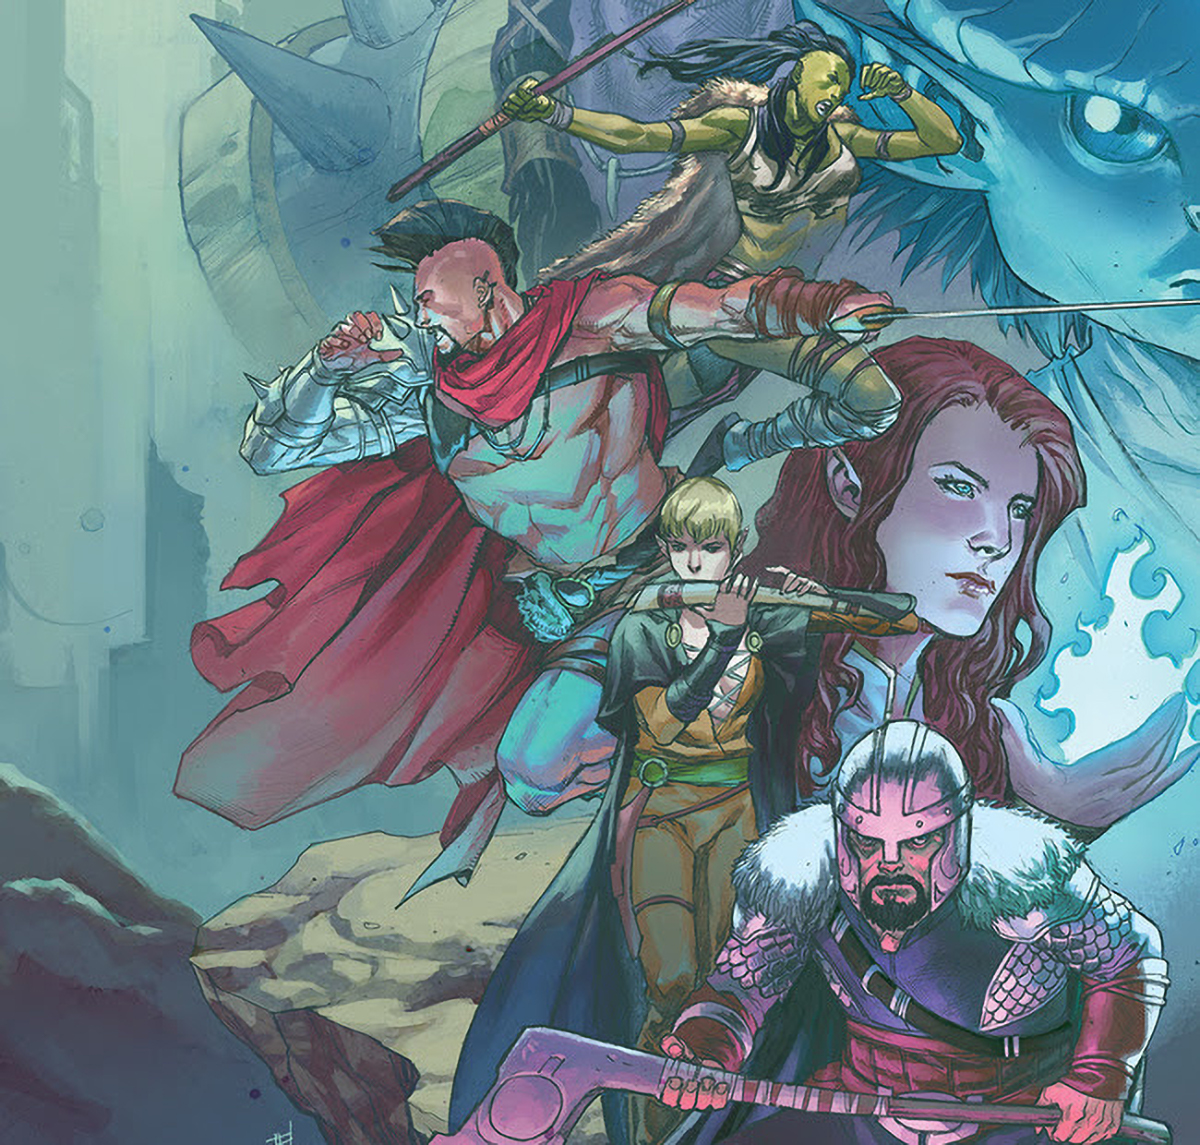 Top Cow announces high fantasy series 'Helm Greycastle' for April 28th